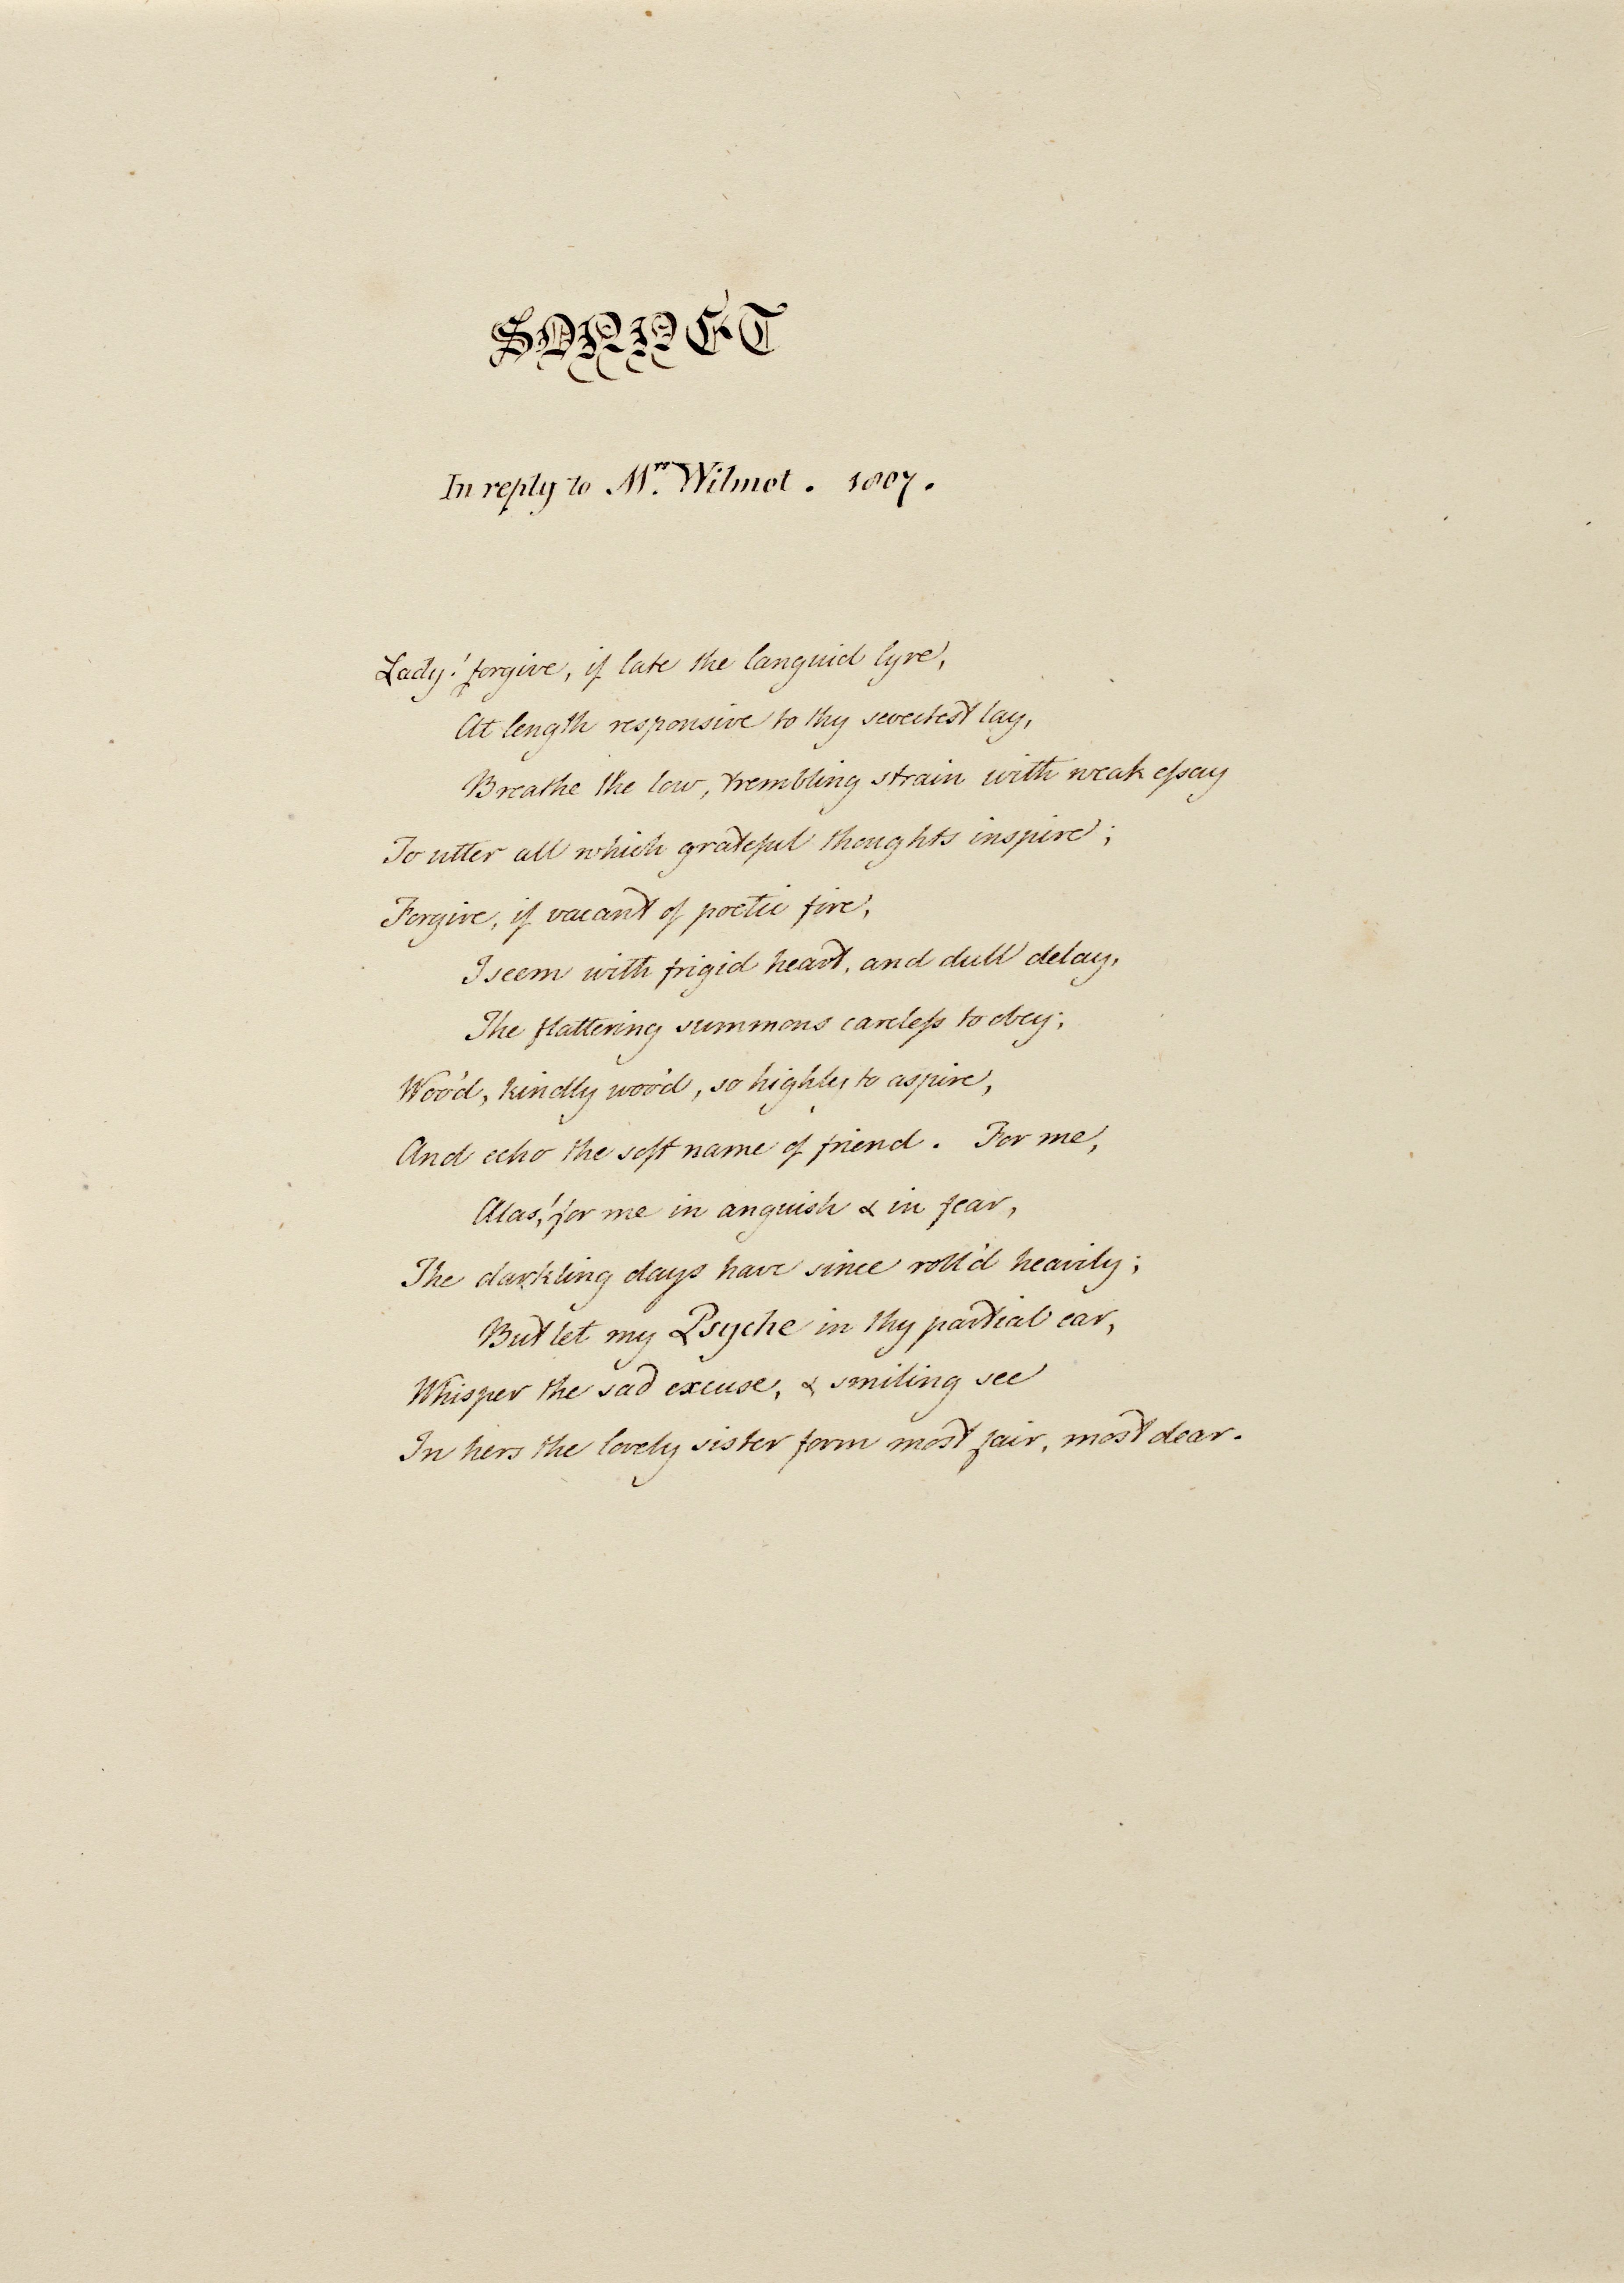 Manuscript of Tighe’s “Sonnet in reply
            to Mrs. Wilmot. 1807”.